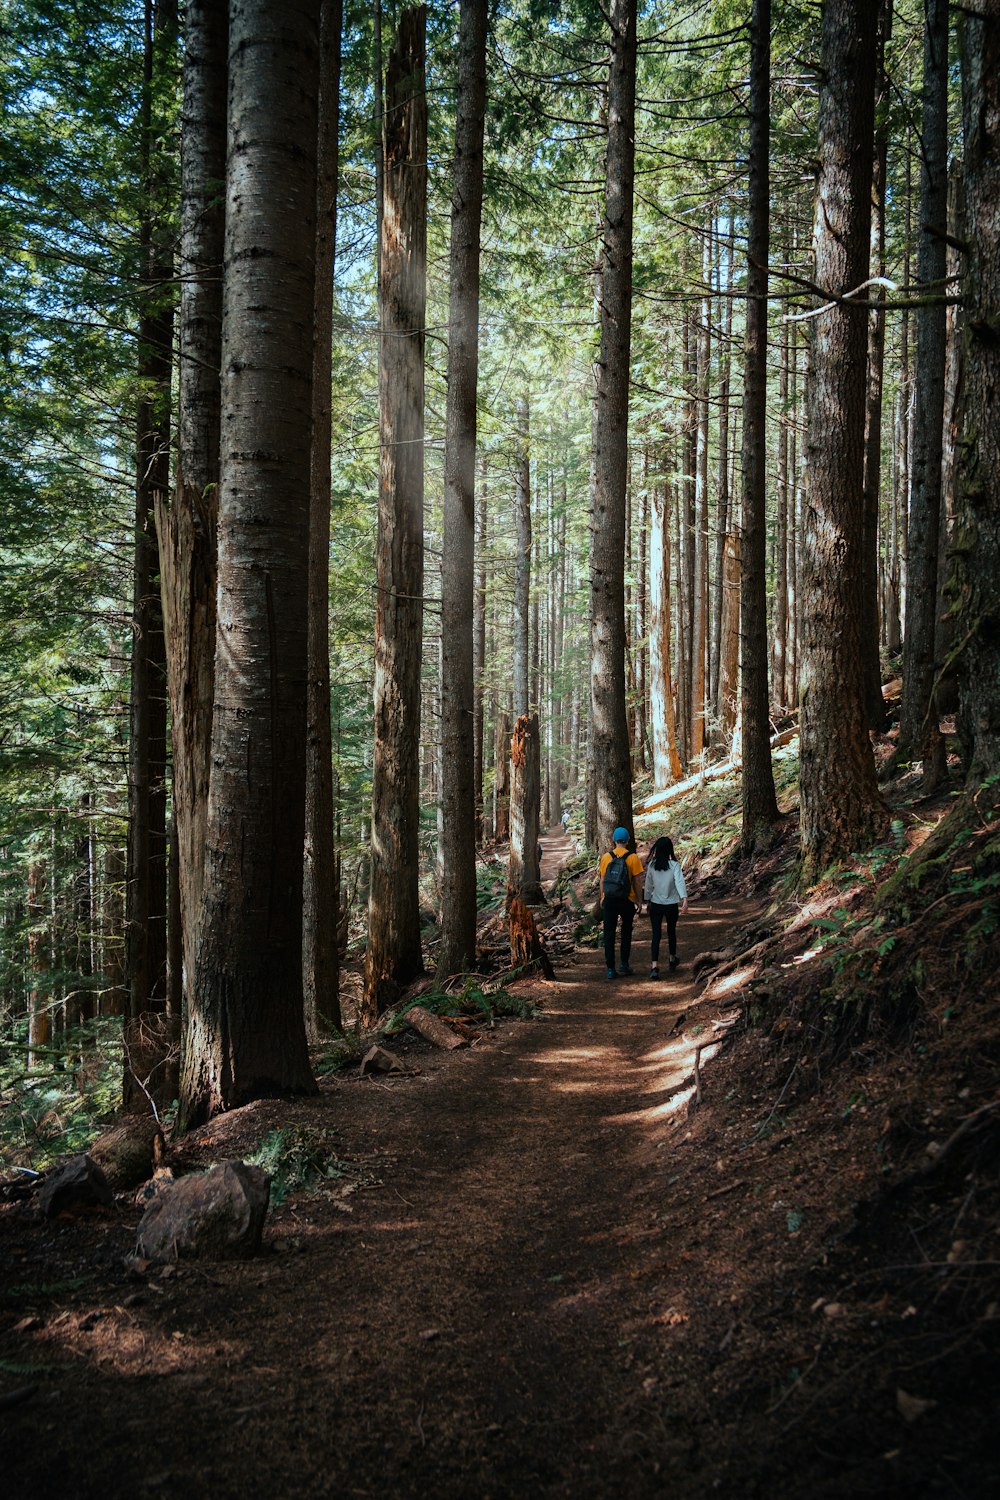 a couple of people walking down a dirt road through a forest